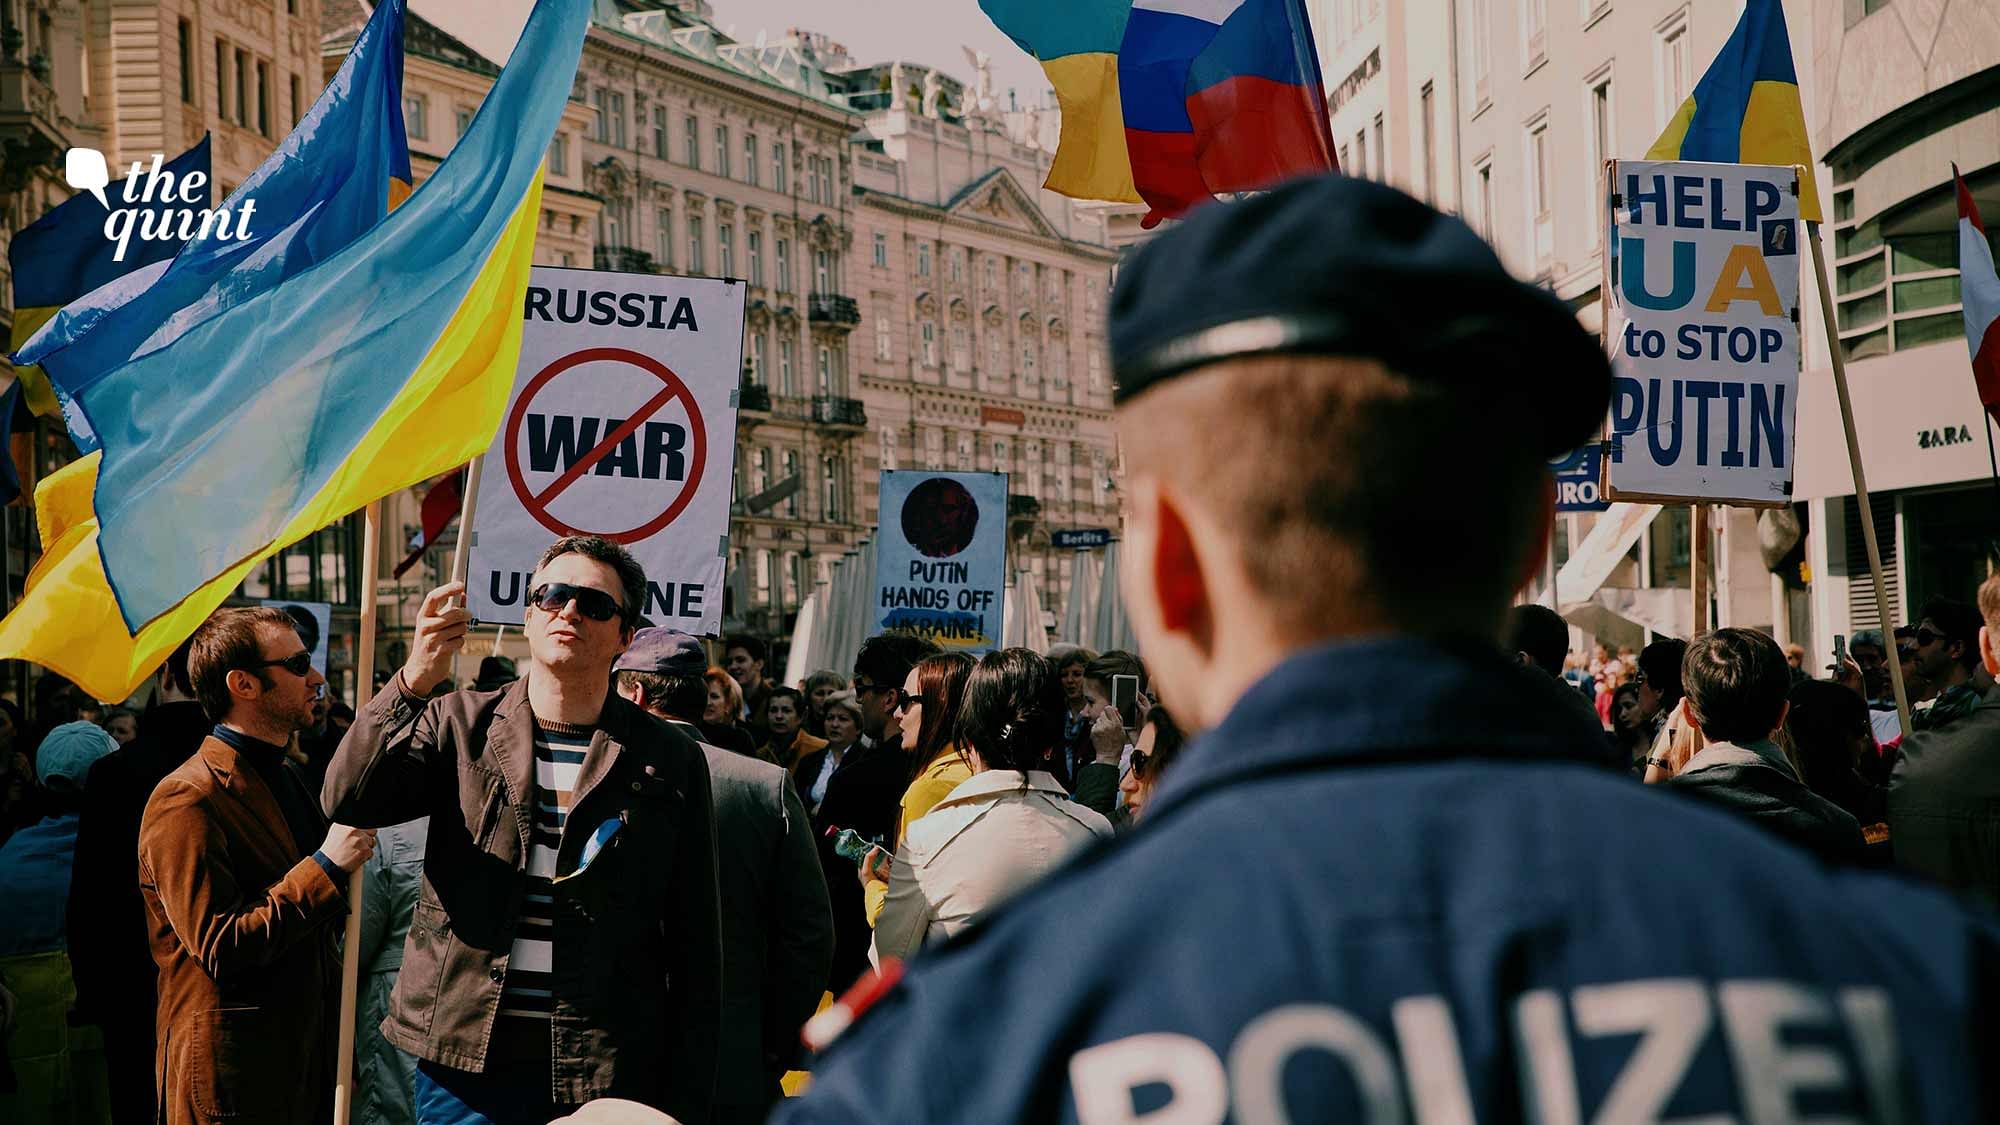 <div class="paragraphs"><p>Protests in Ukraine from 2014. Image used for representational purposes only.&nbsp;</p></div>